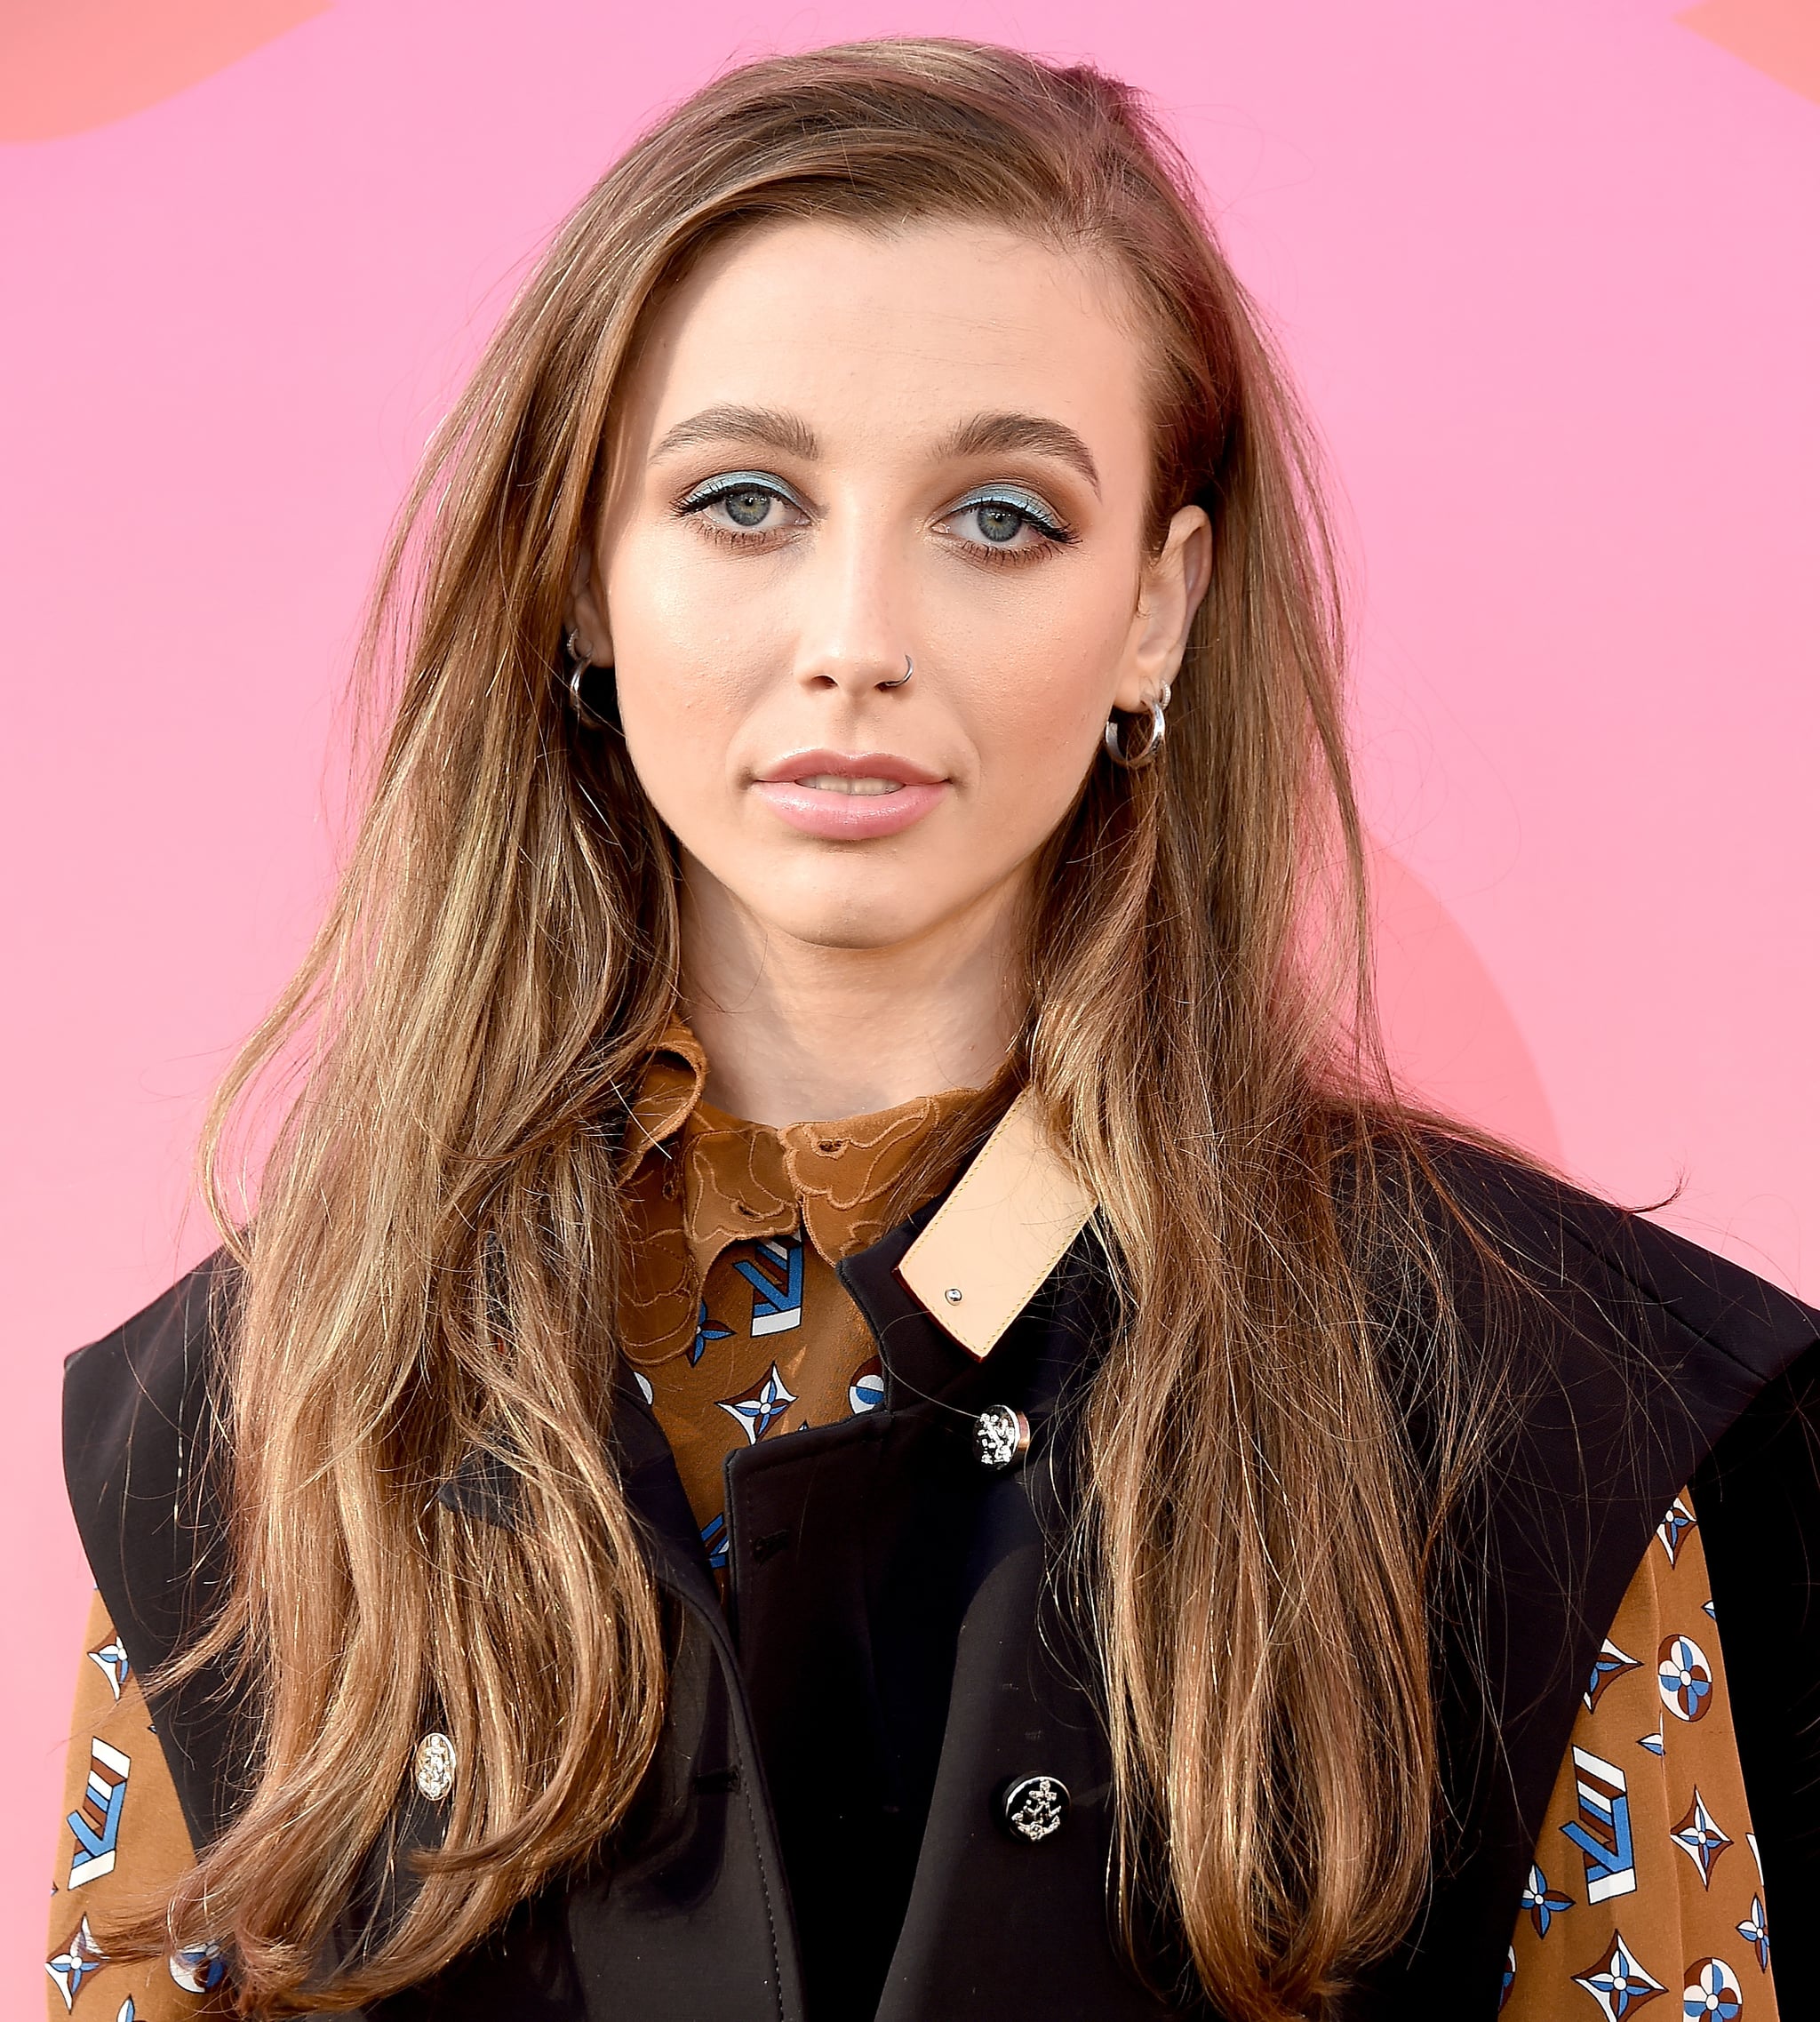 Emma Chamberlain Dyed Her Hair a Red Color | POPSUGAR Beauty